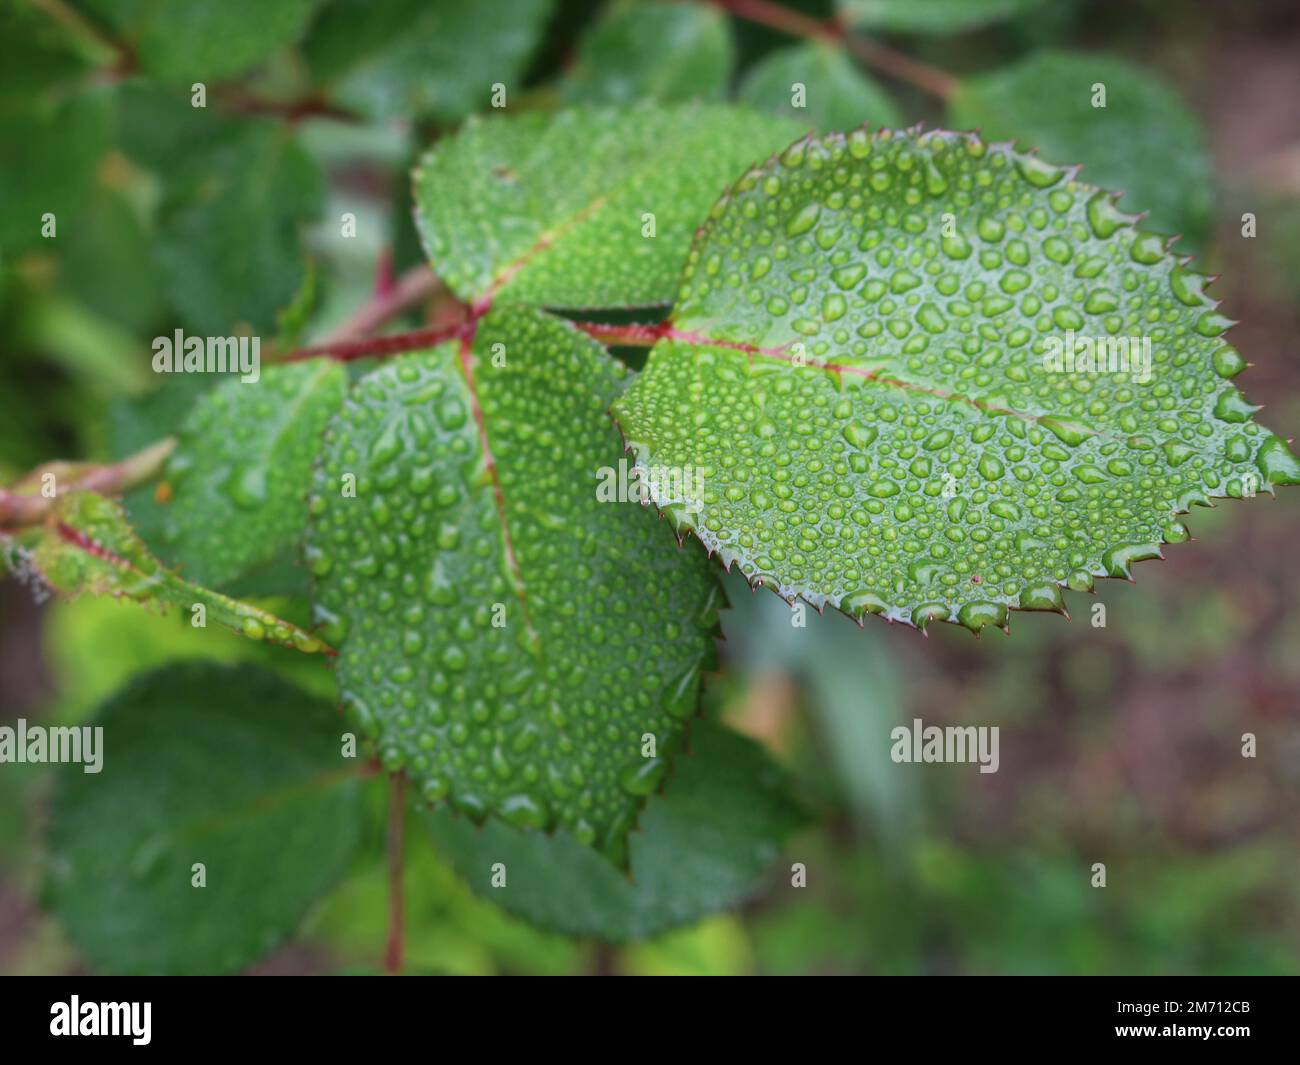 texture of raindrops or dewdrops on a green leaf with spiky edges close-up, natural background fading into blur with leaves of rose bushes Stock Photo